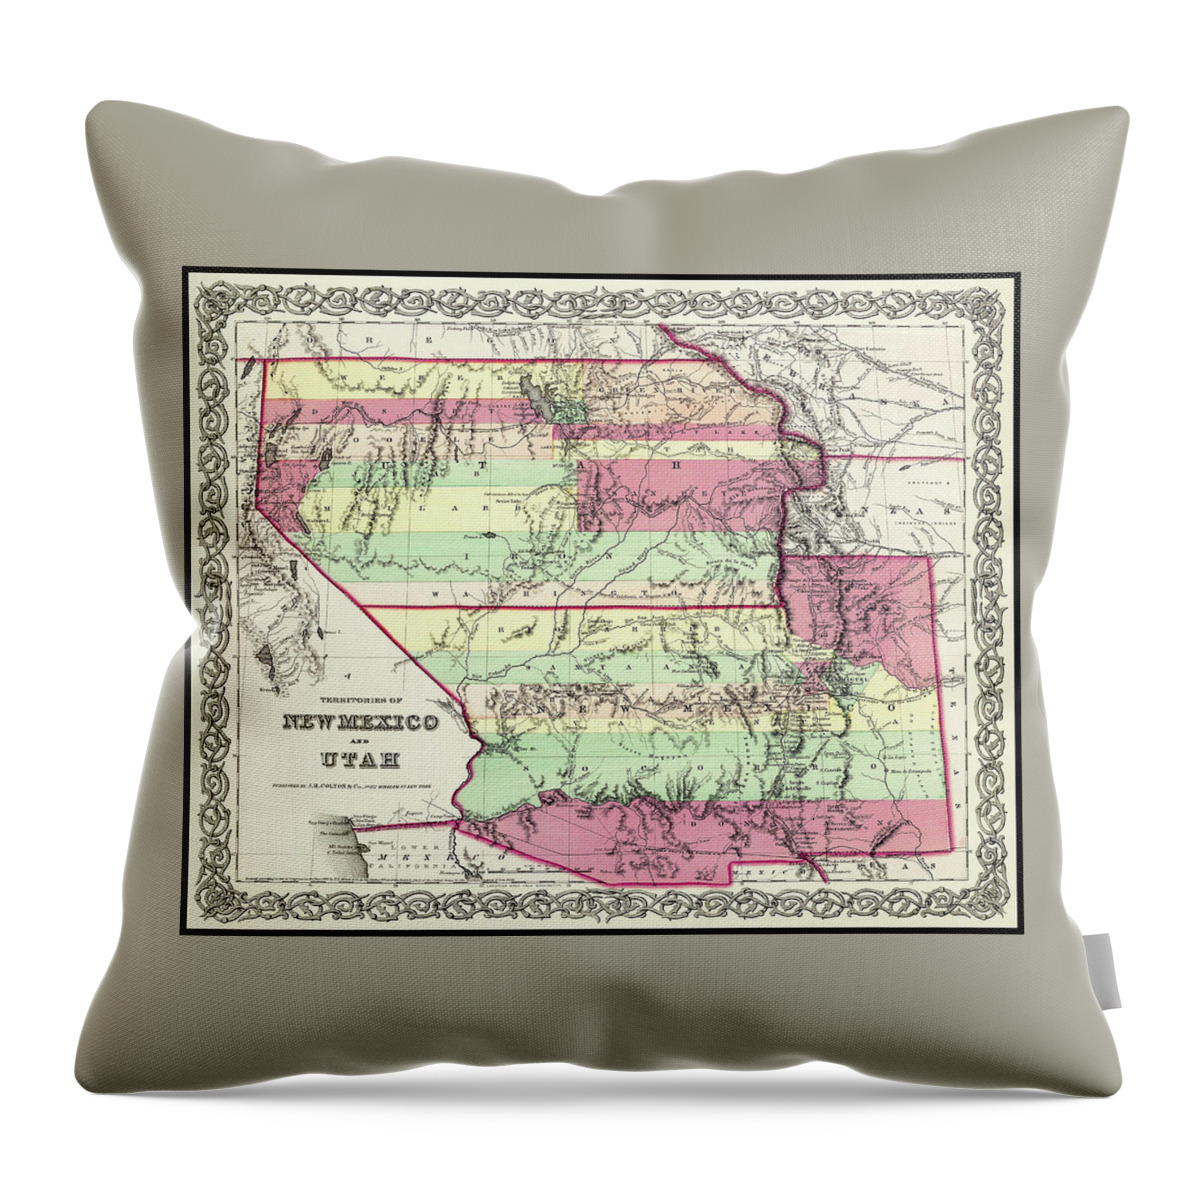 New Mexico Map Throw Pillow featuring the photograph New Mexico and Utah Vintage Map 1855 by Carol Japp